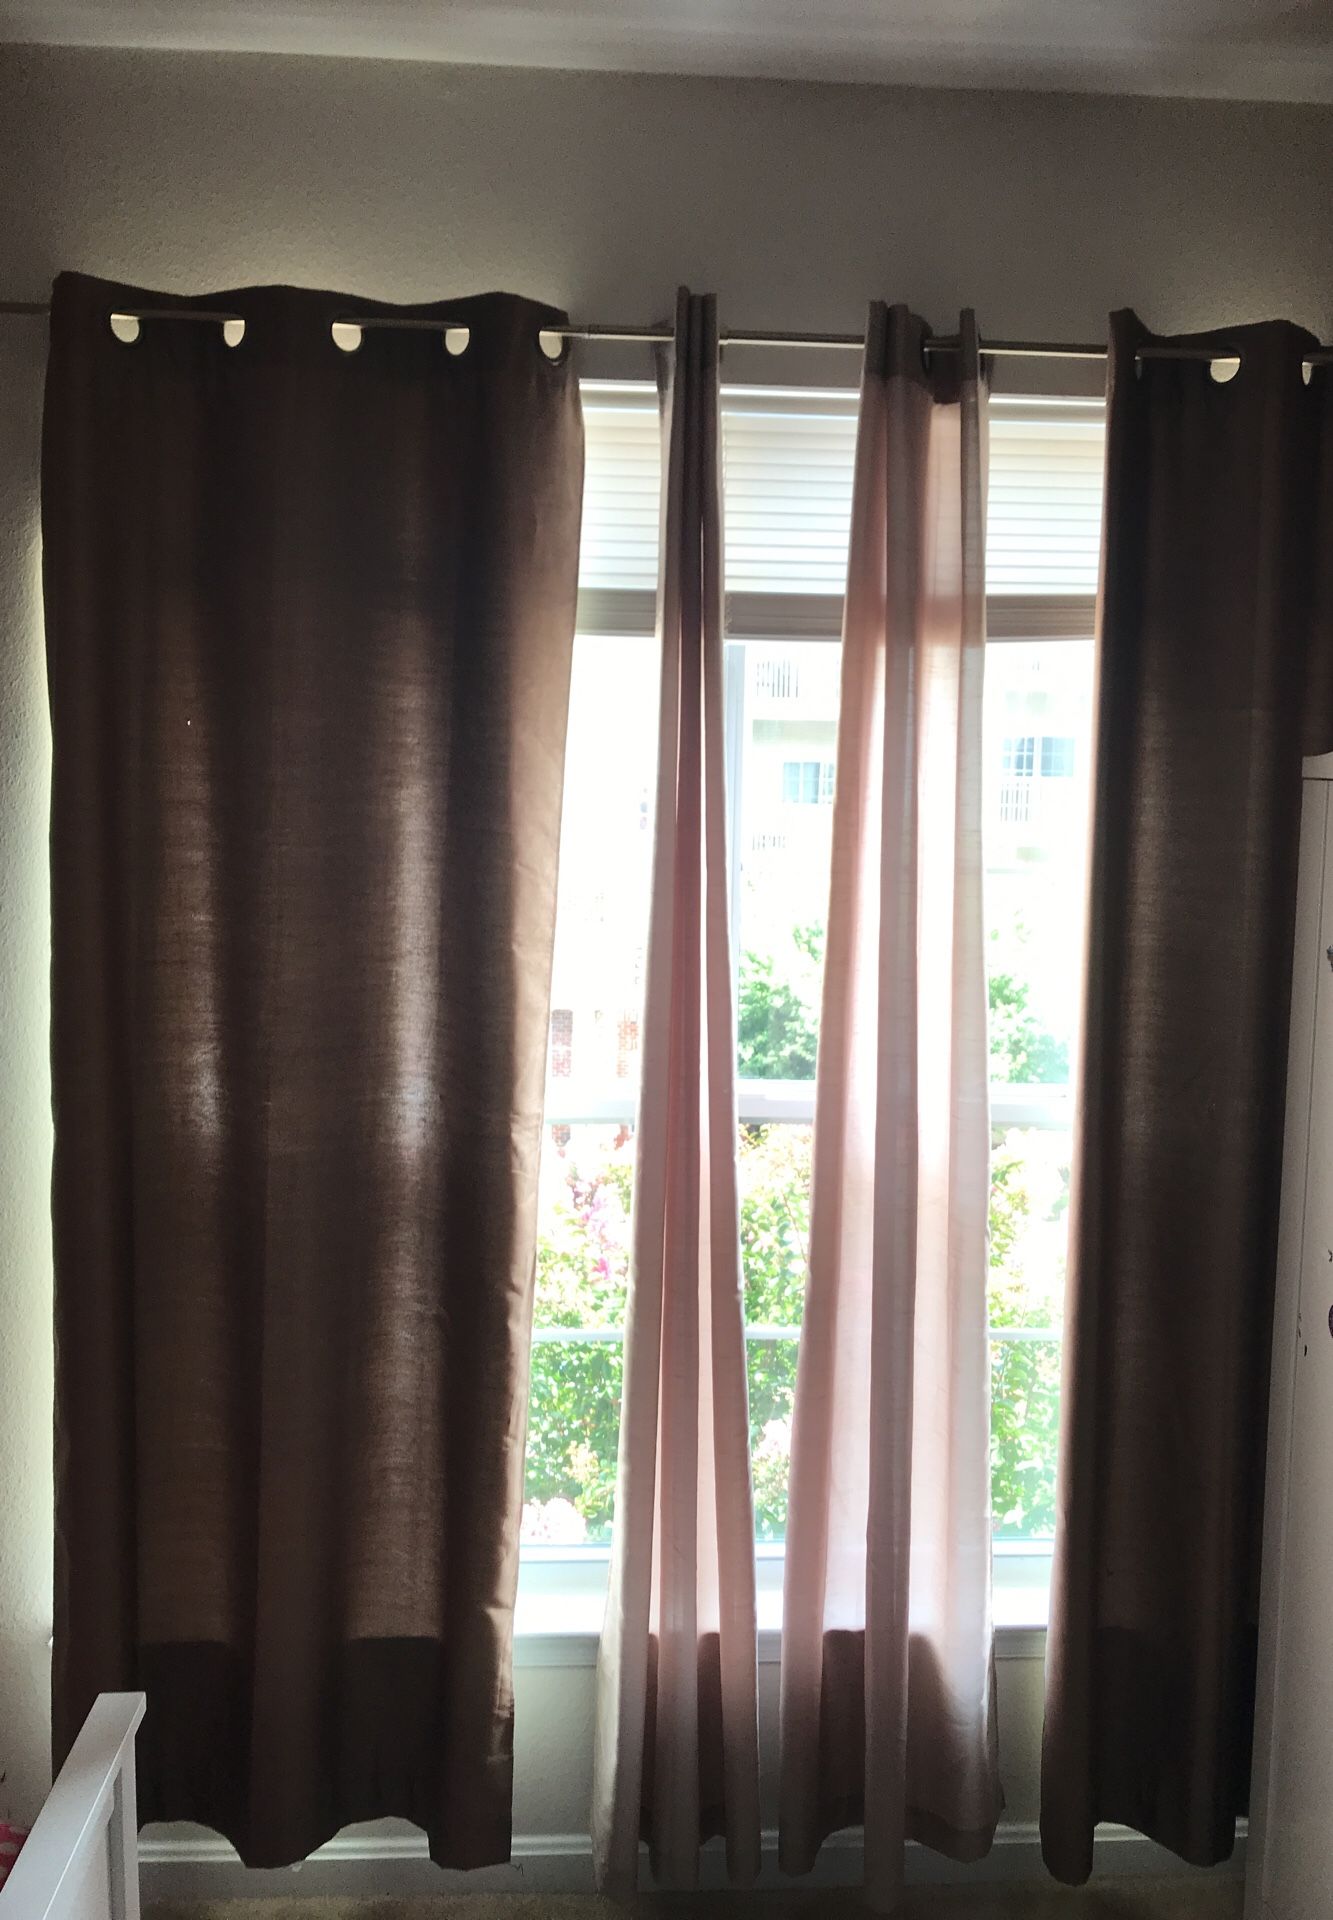 Curtains set of 4